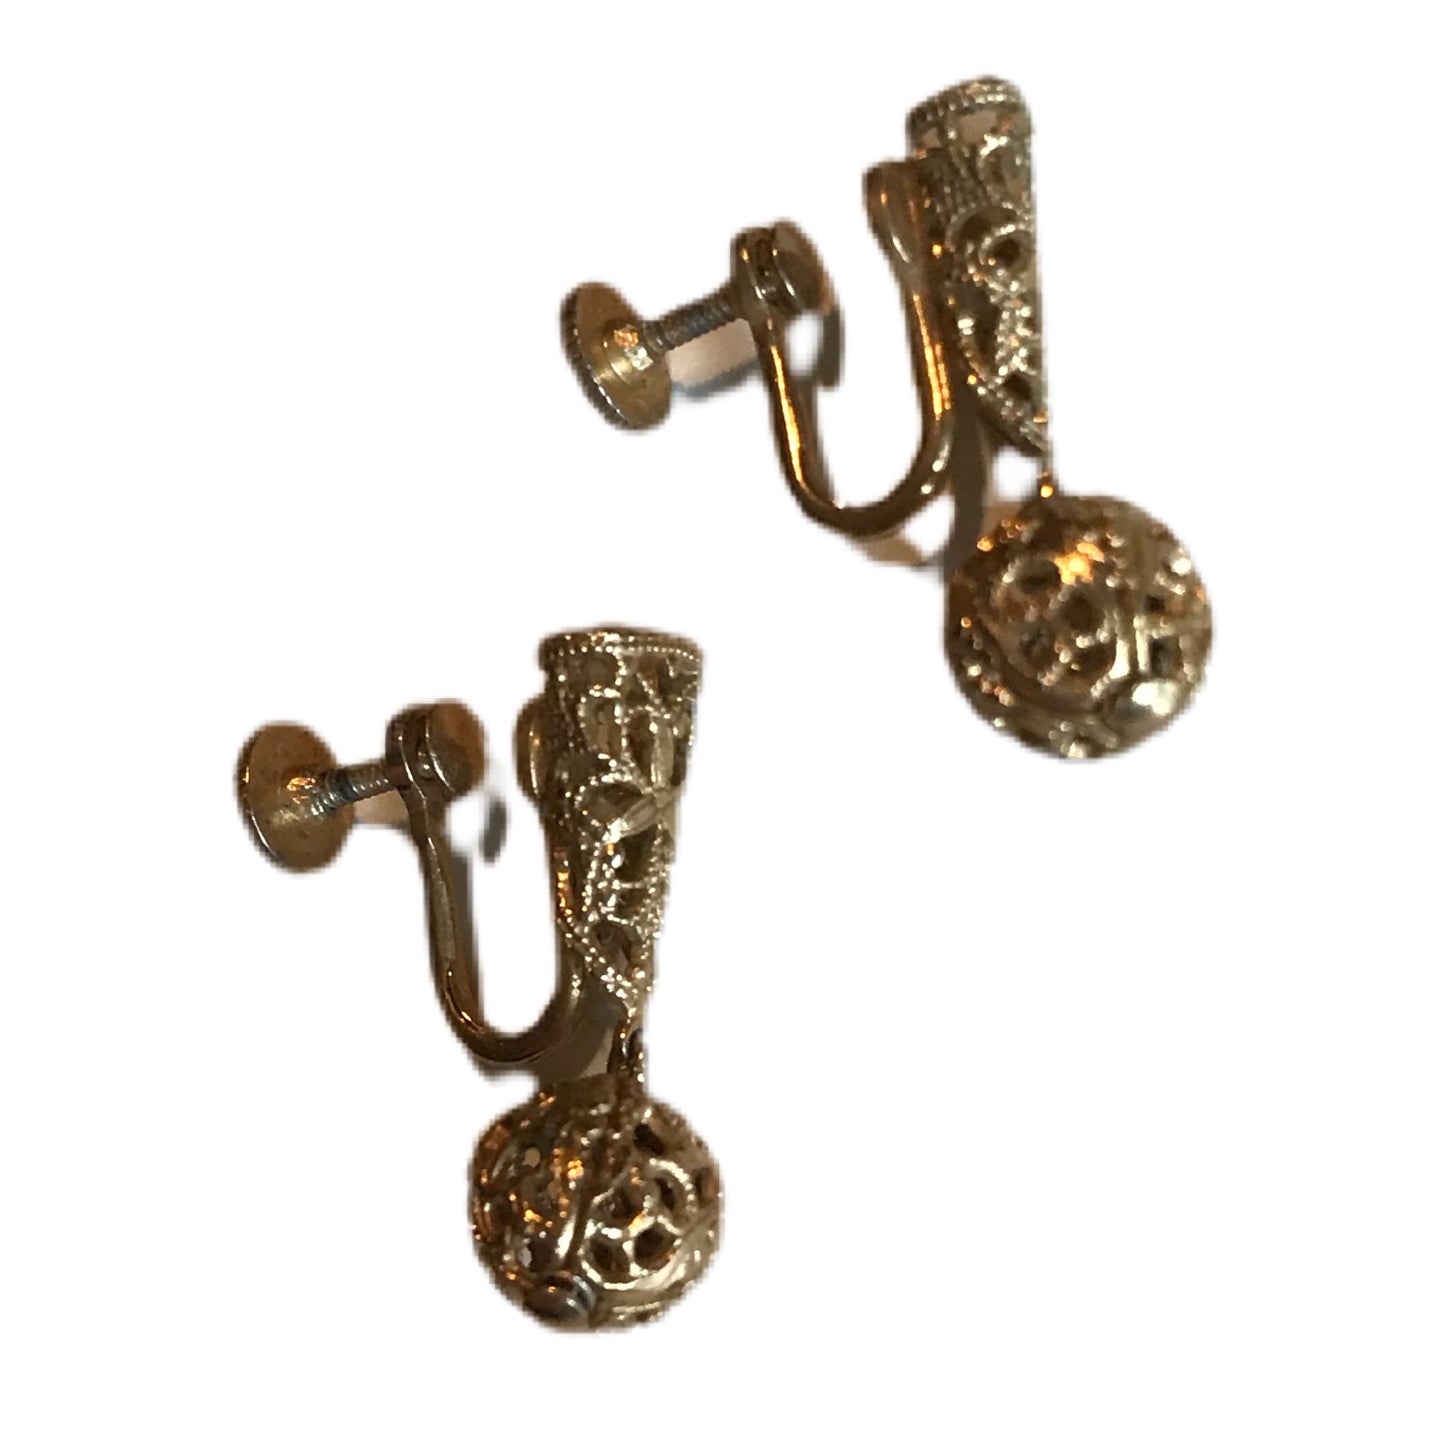 Gold Tone Filigree Exclamation Mark Dangles Screw Back Clip Earrings circa 1940s